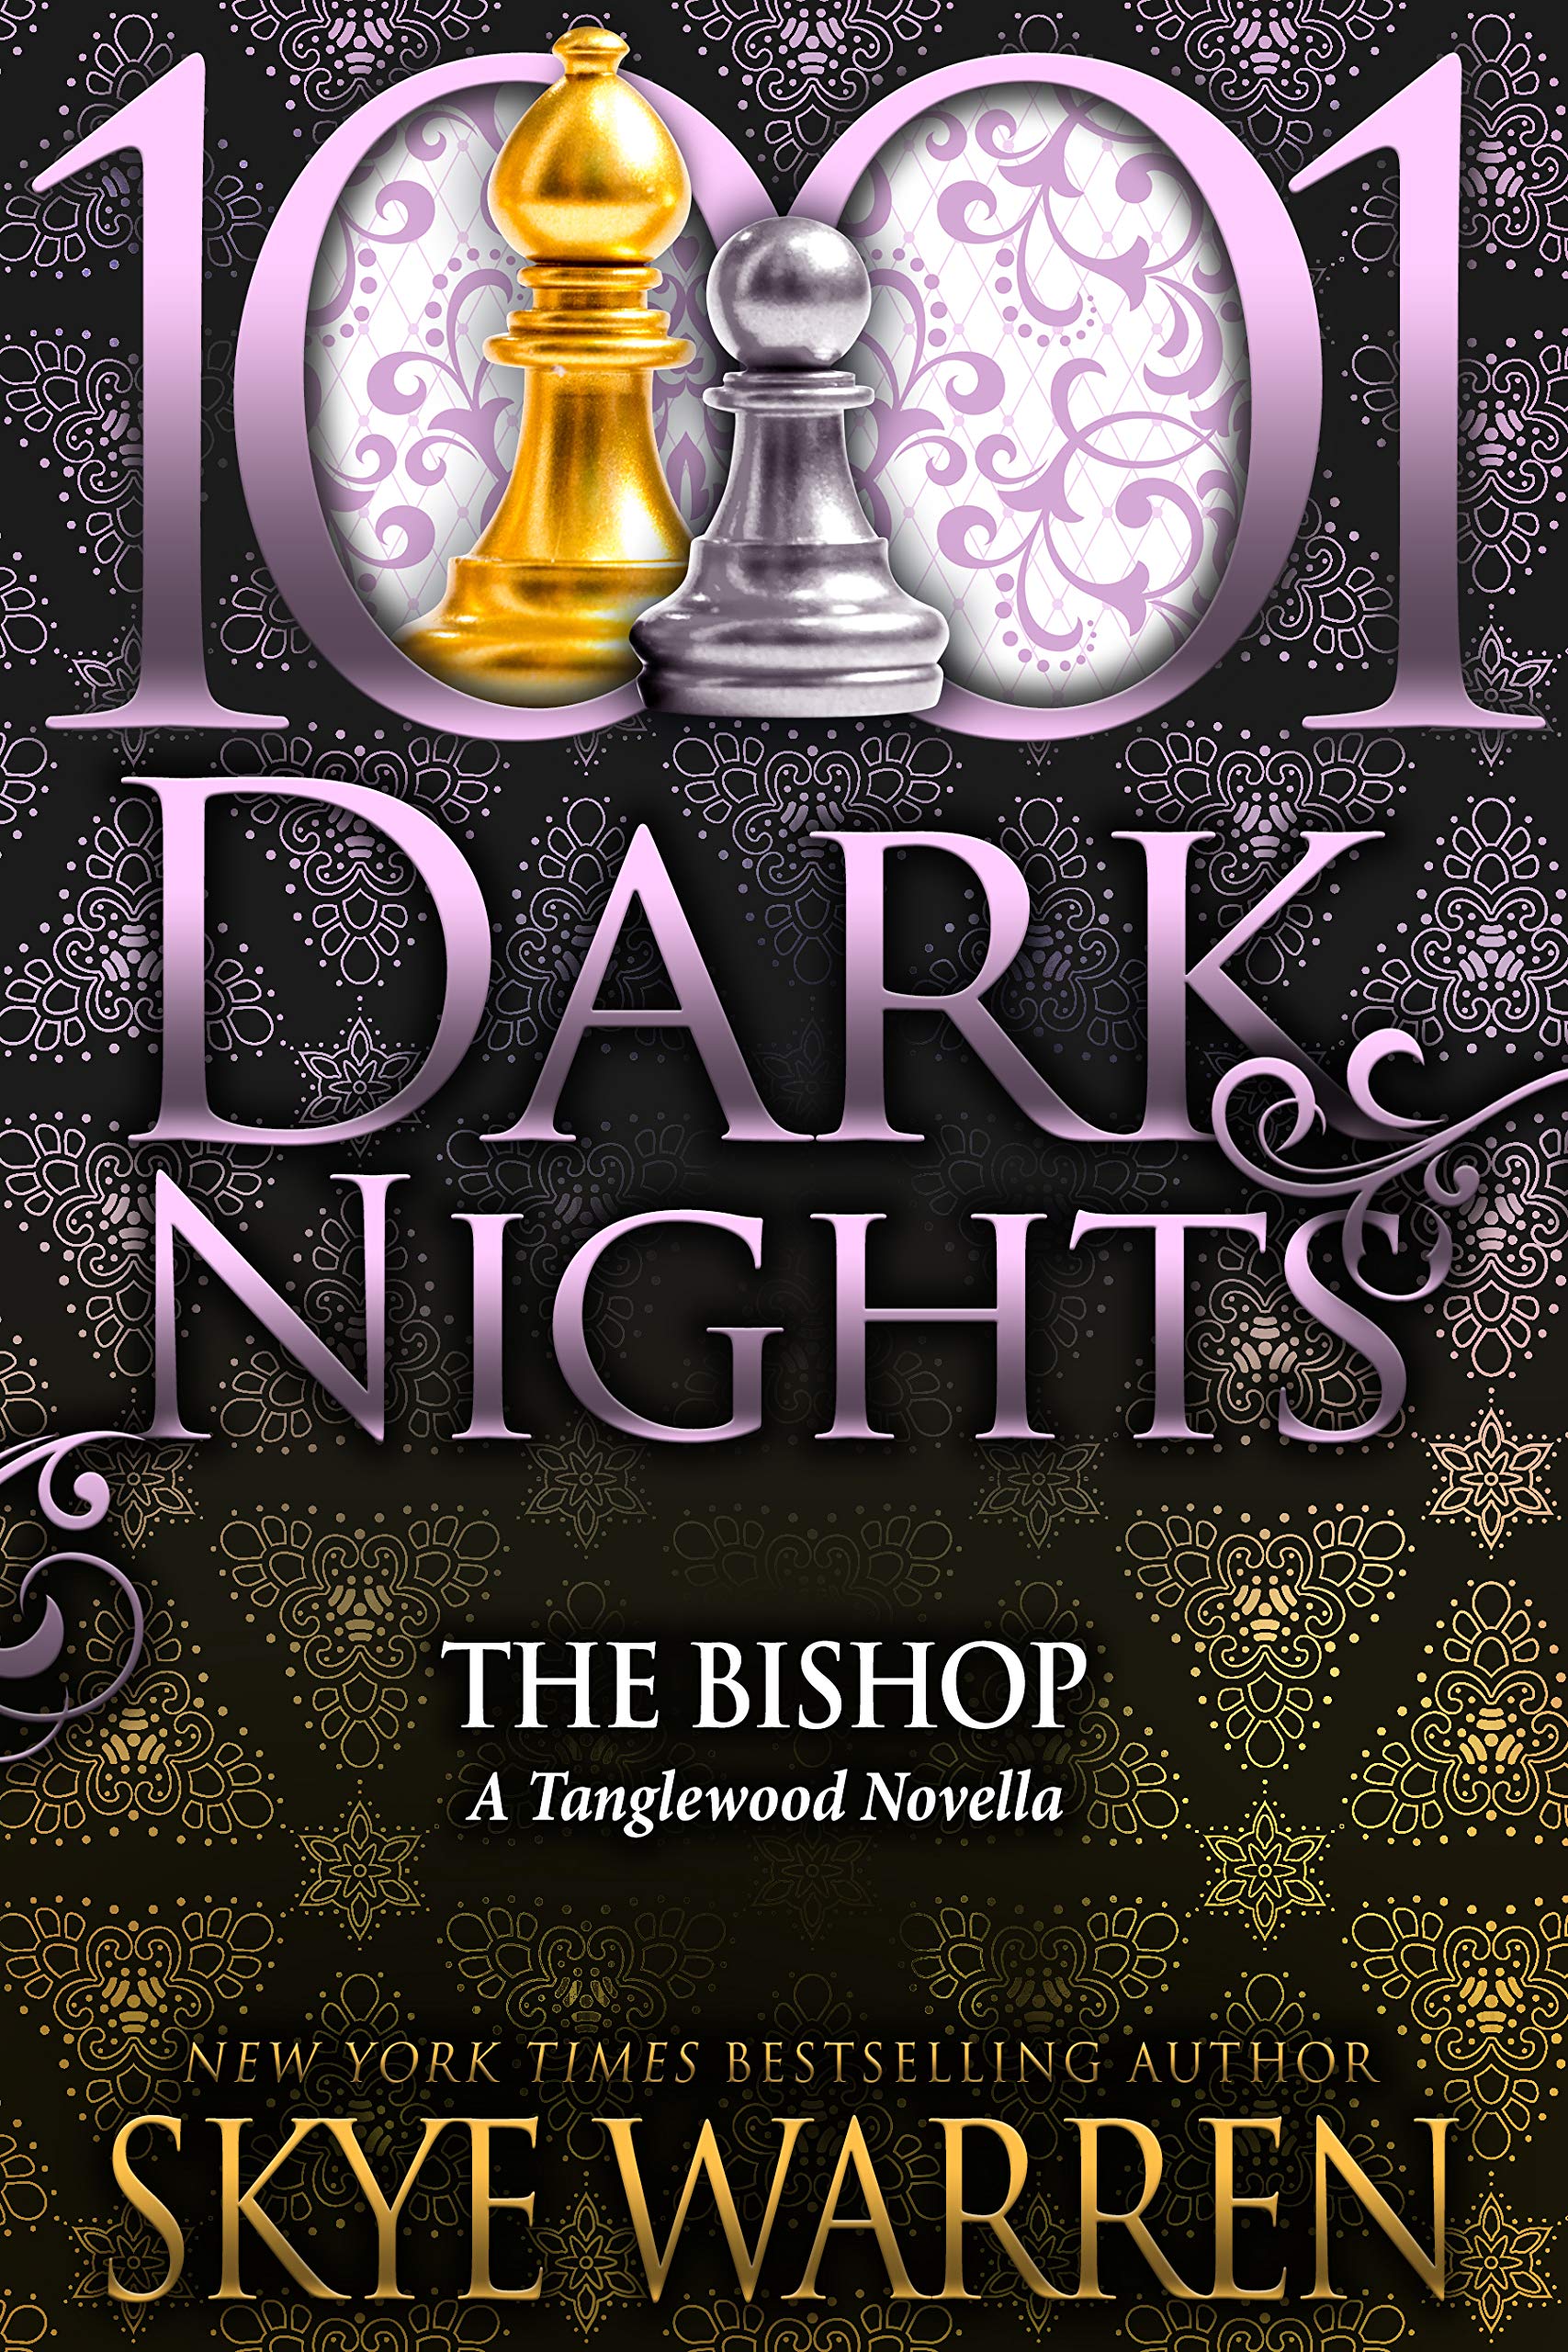 Book Cover The Bishop: A Tanglewood Novella